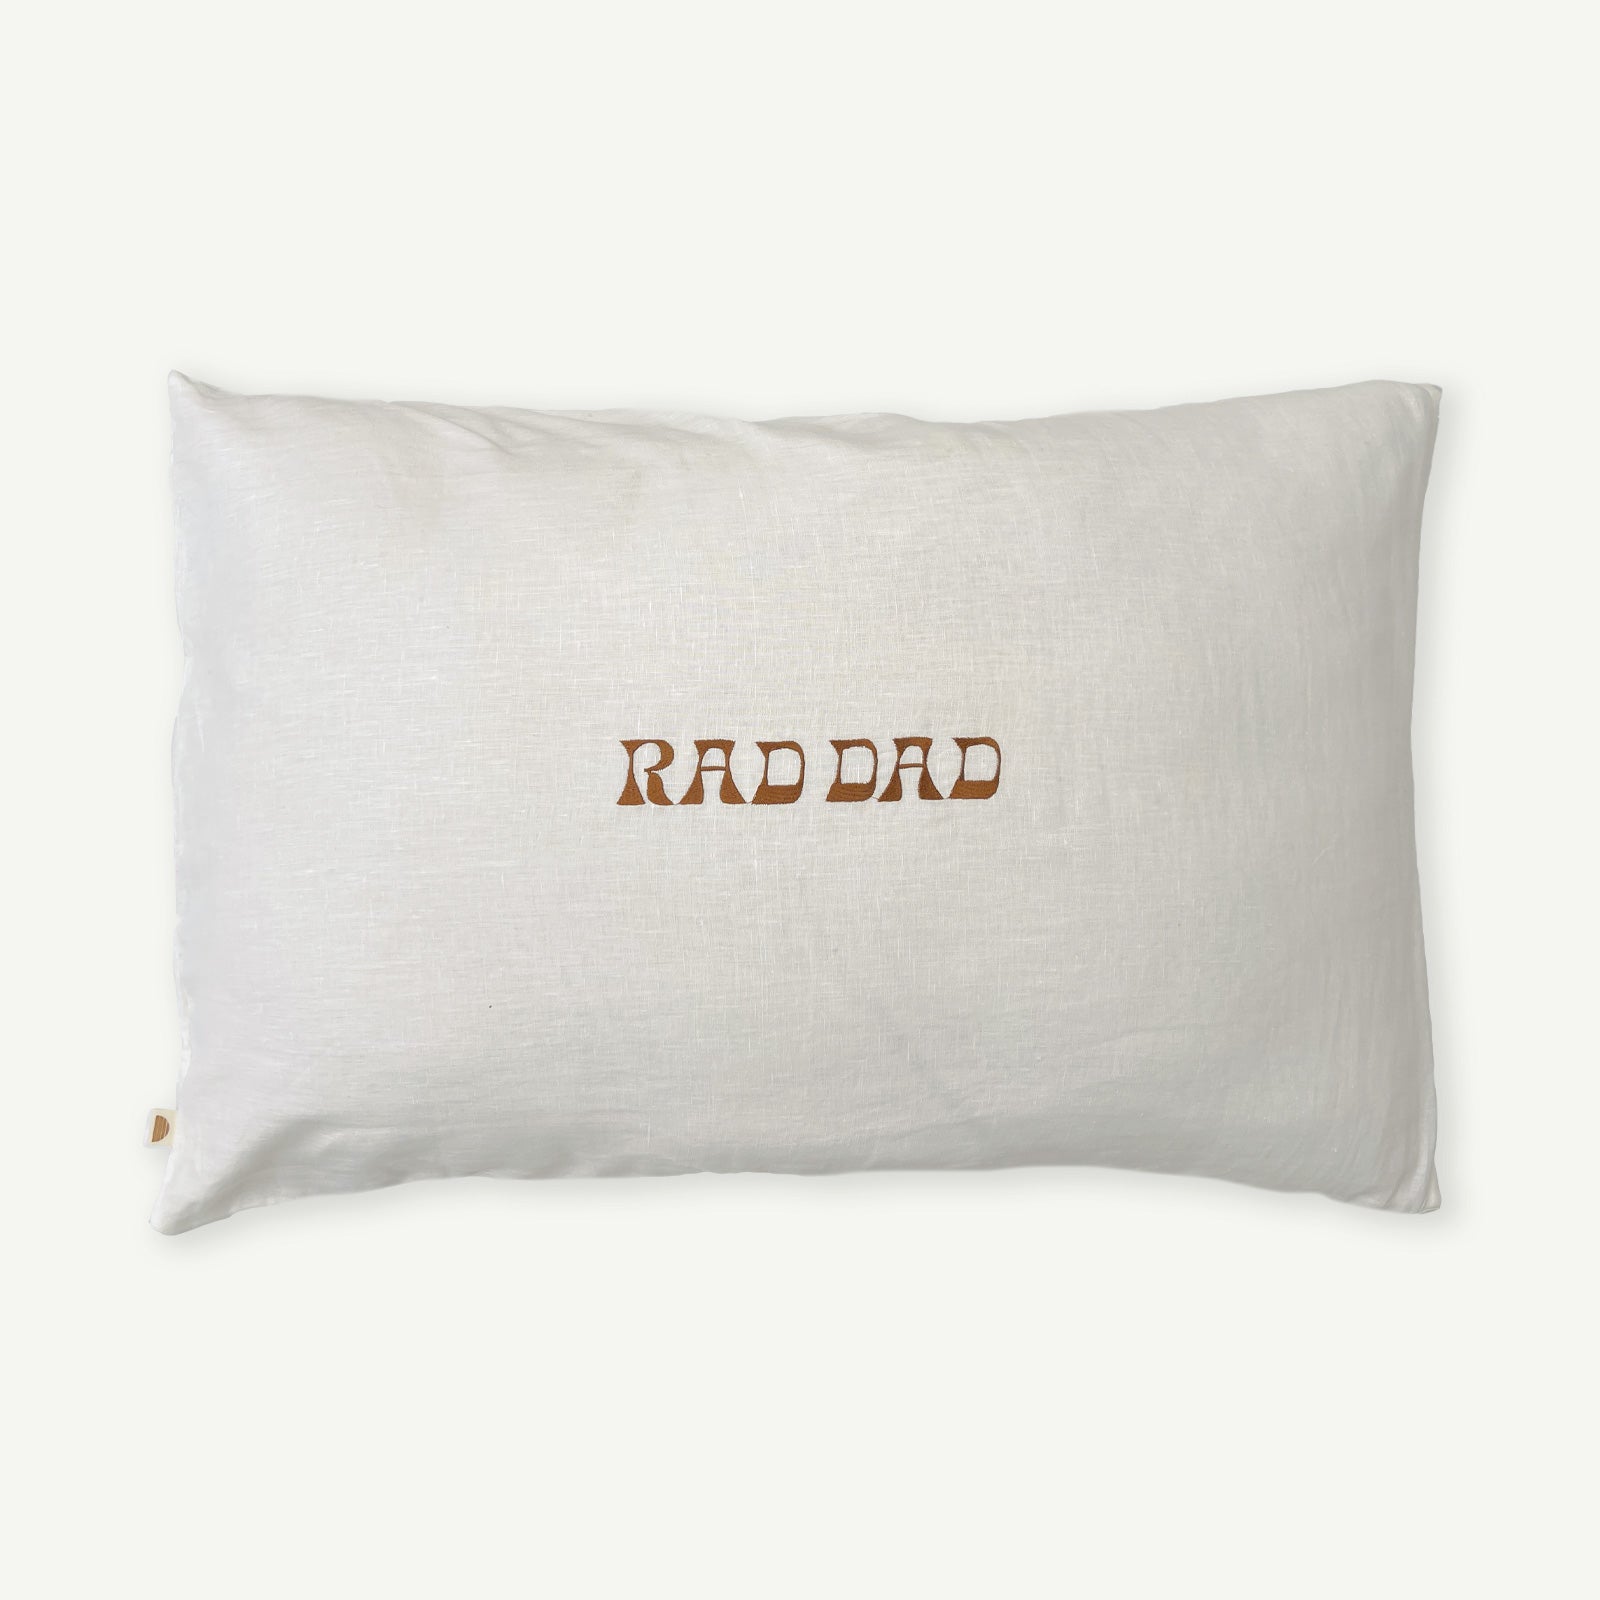 Rad Dad Embroidered Standard Pillowcase